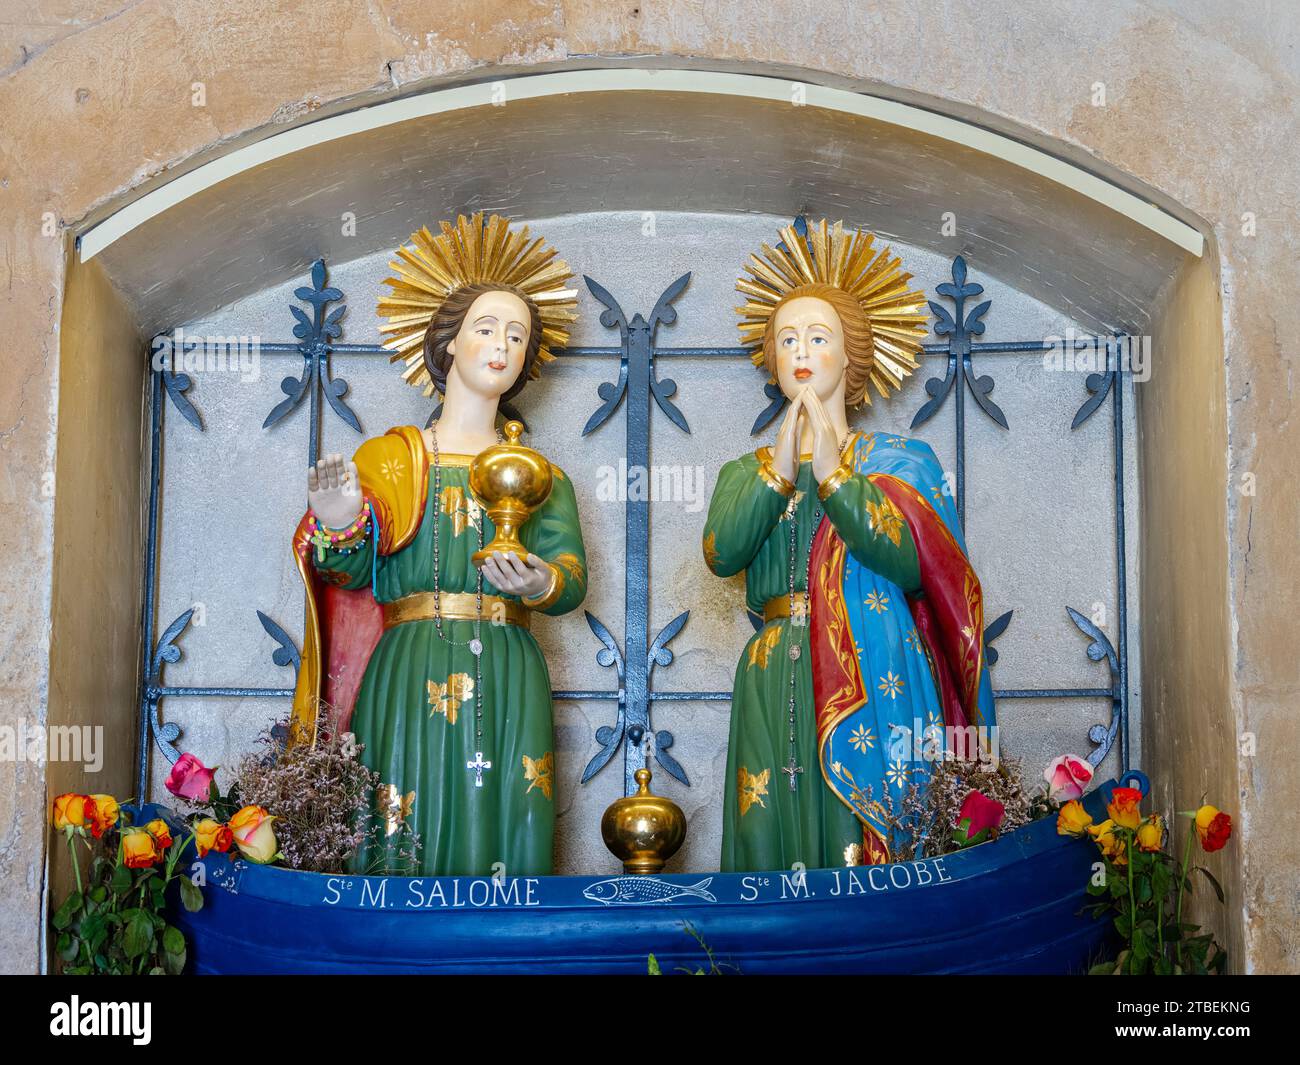 Saintes Maries de la Mer, France - October 3, 2023: Statues of the Mary Salome and Mary Jacobe in the church of Three Marys or Notre Dame de la Mer Stock Photo